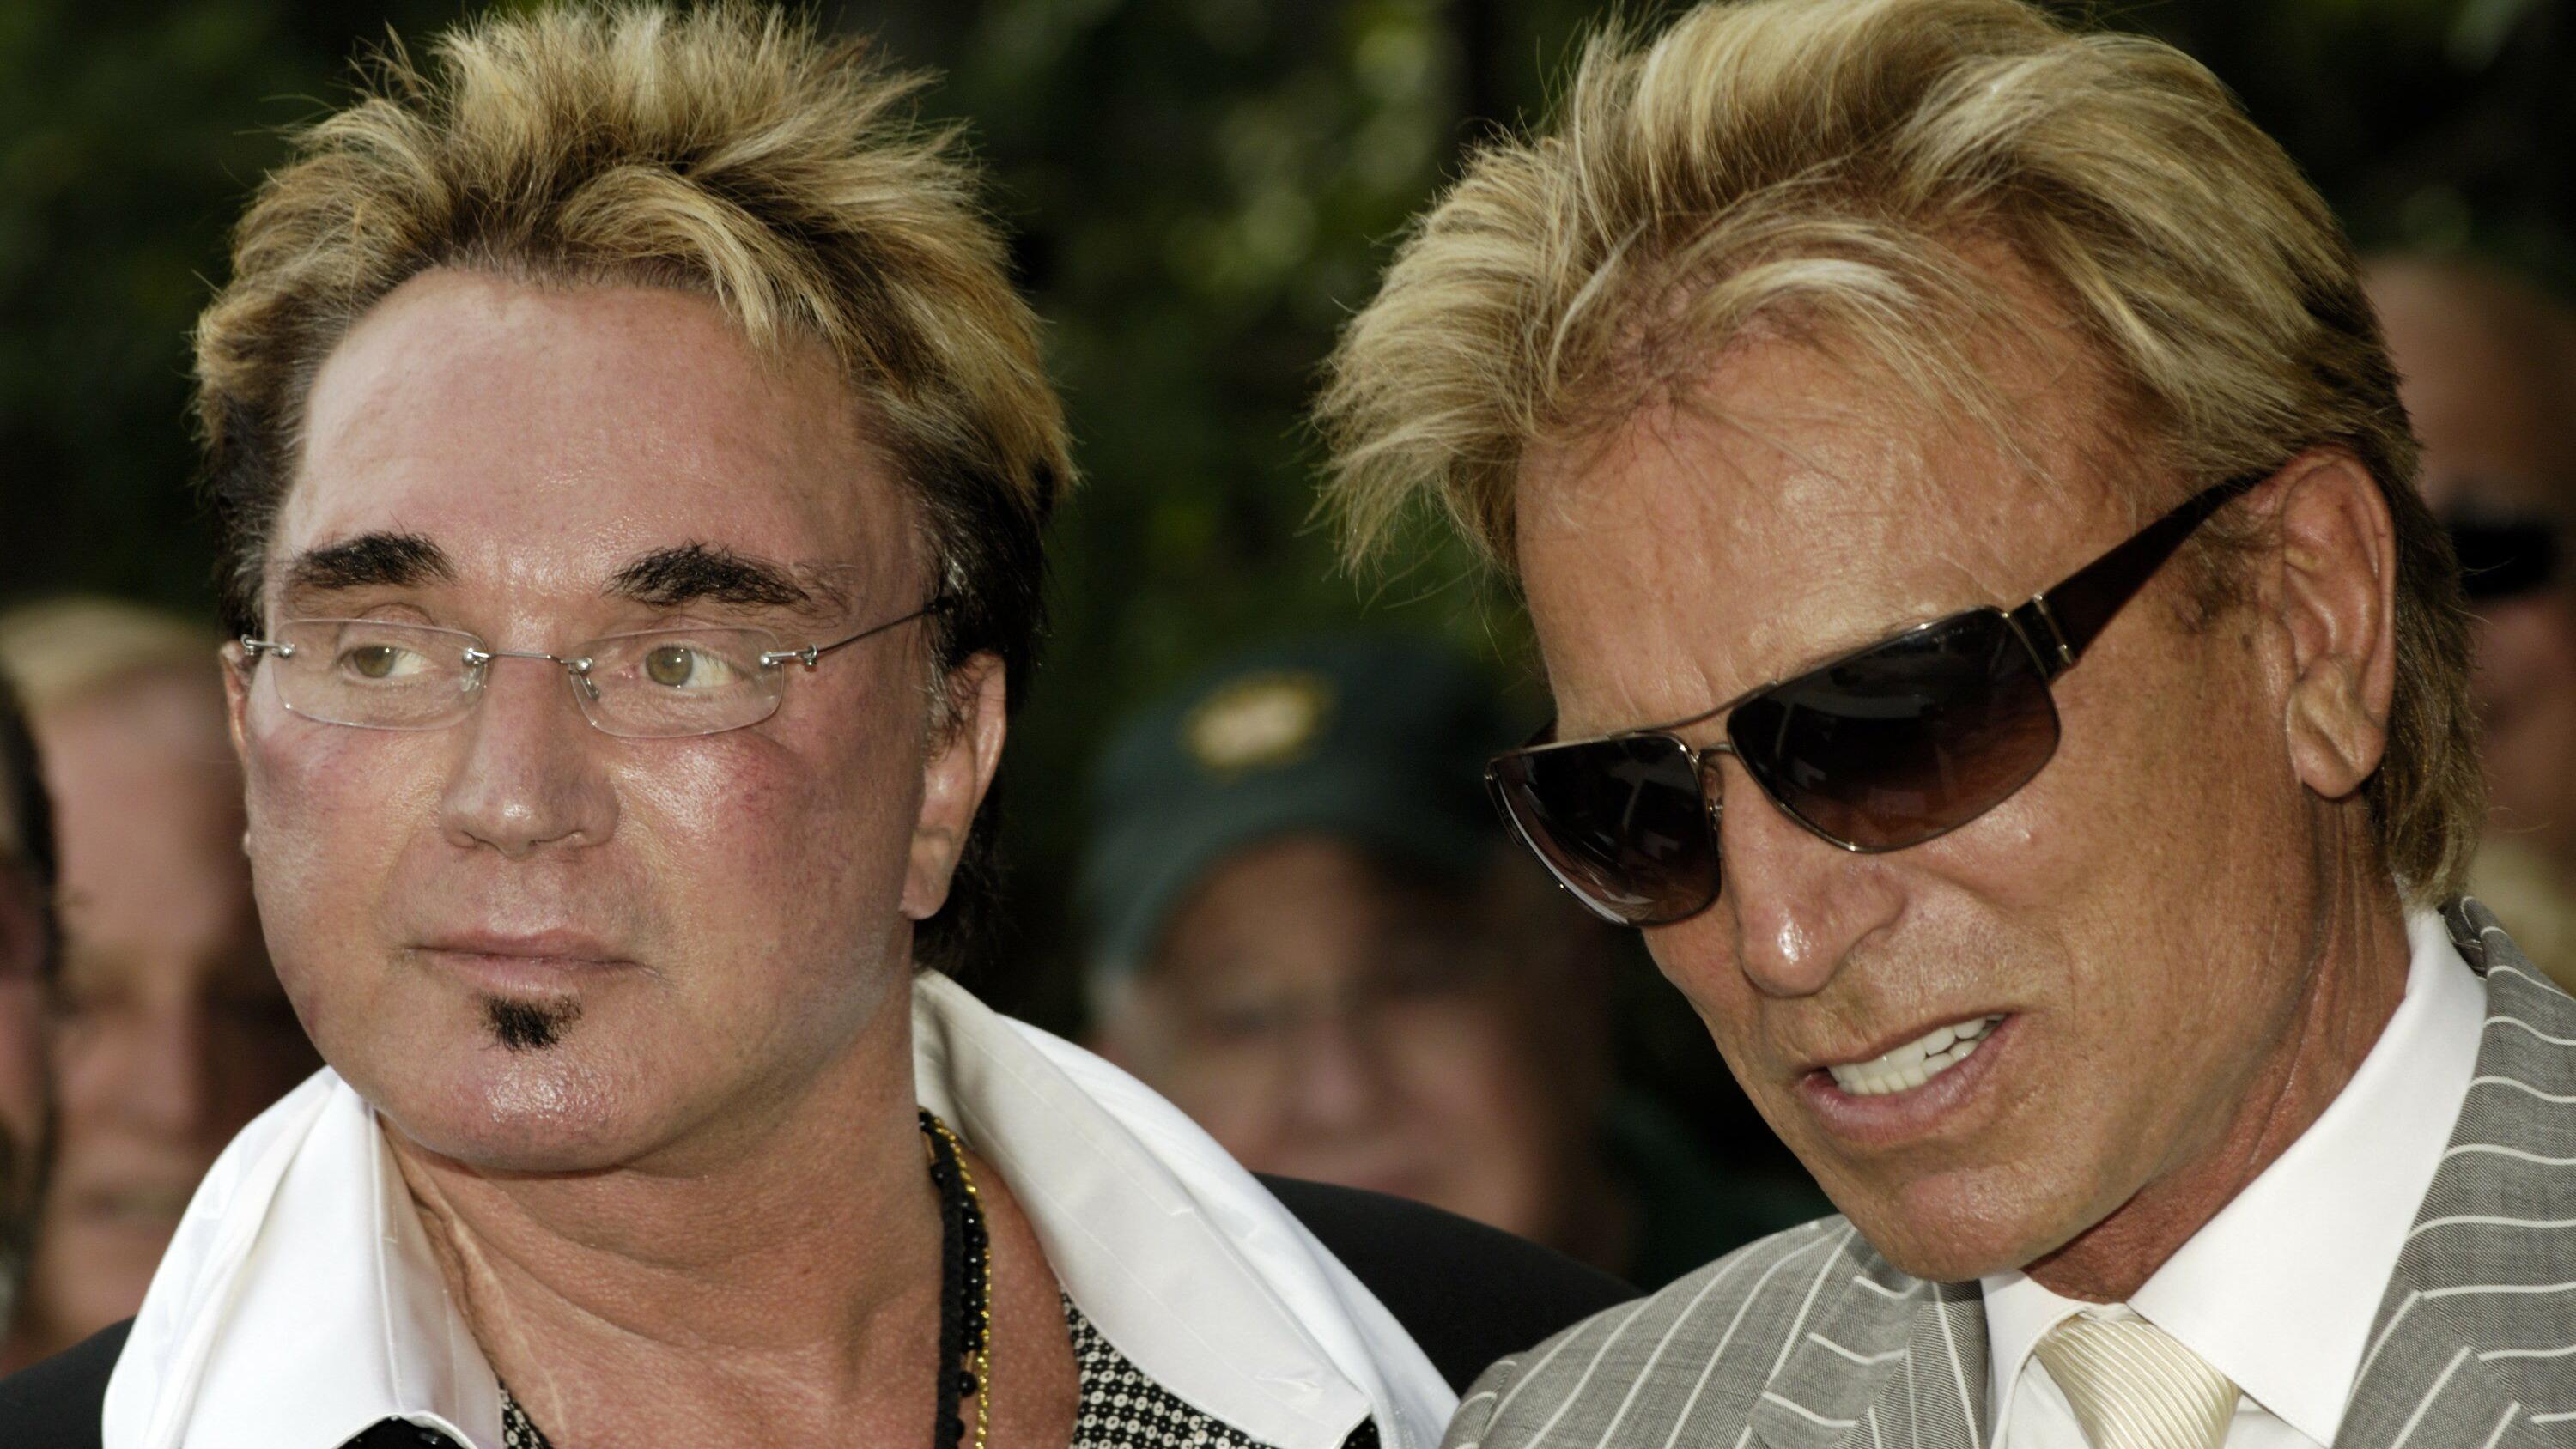 Magicians Siegfried and Roy received a Star on the Las Vegas Walk of Stars. The star is located in front of the Mirage Resort where the duo performed since 1993. Roy walked from the car to the ceremony location. Hundreds of fans gathered to watch the